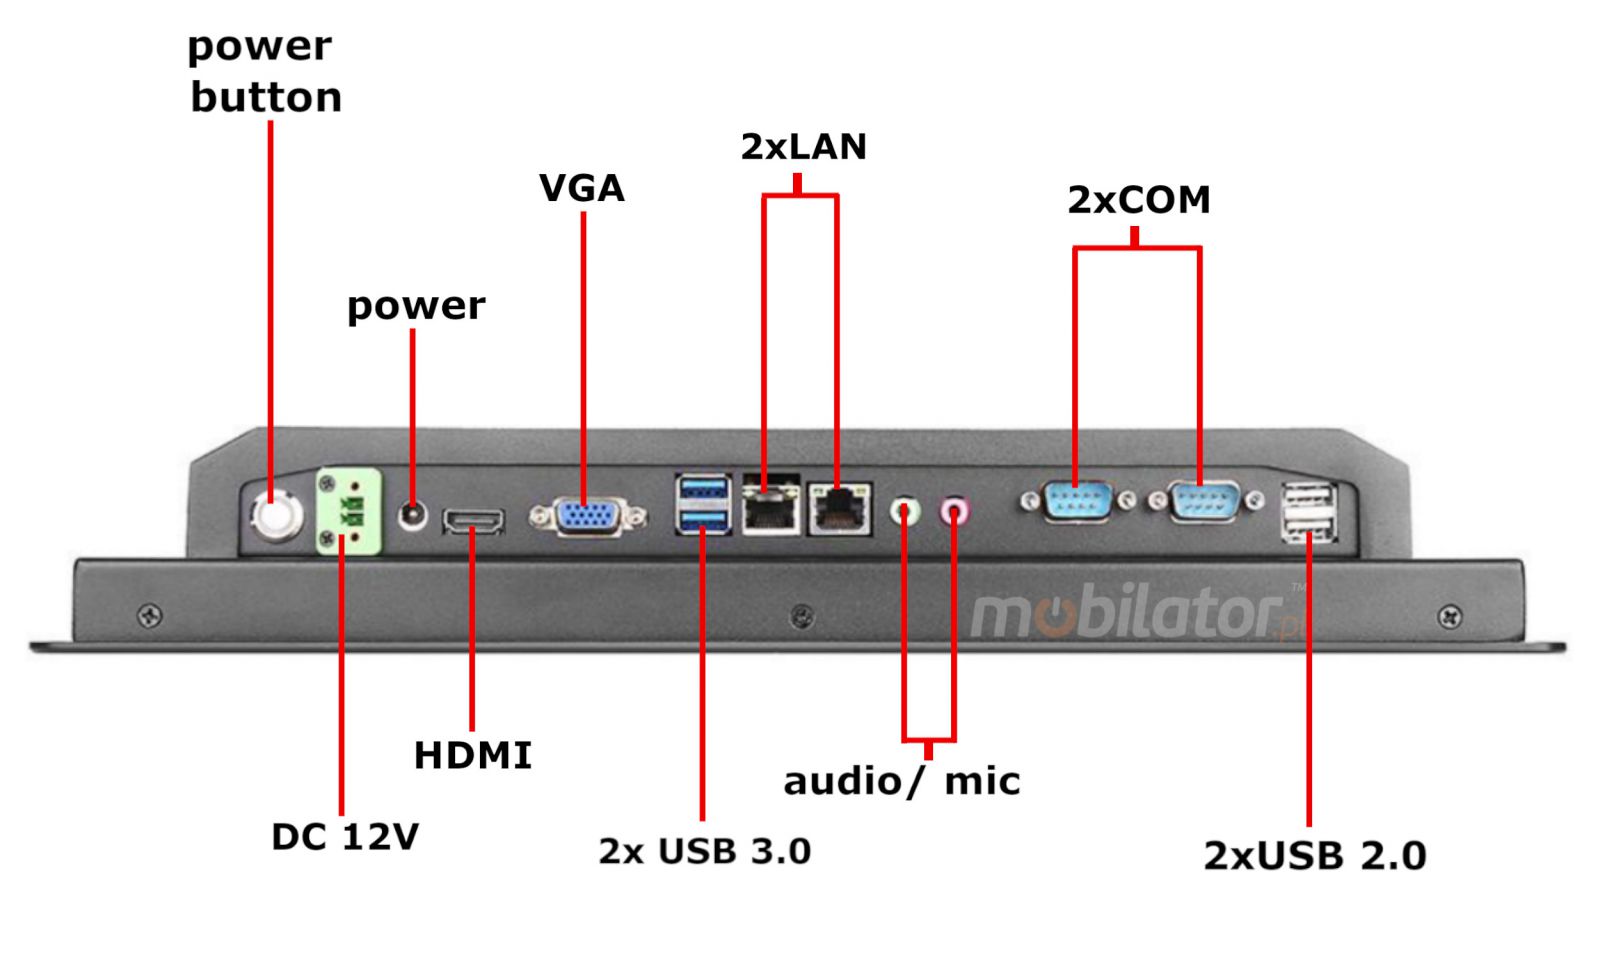 Connectors in the powerful and industrial BiBOX 150PC2 with Intel i5 processor